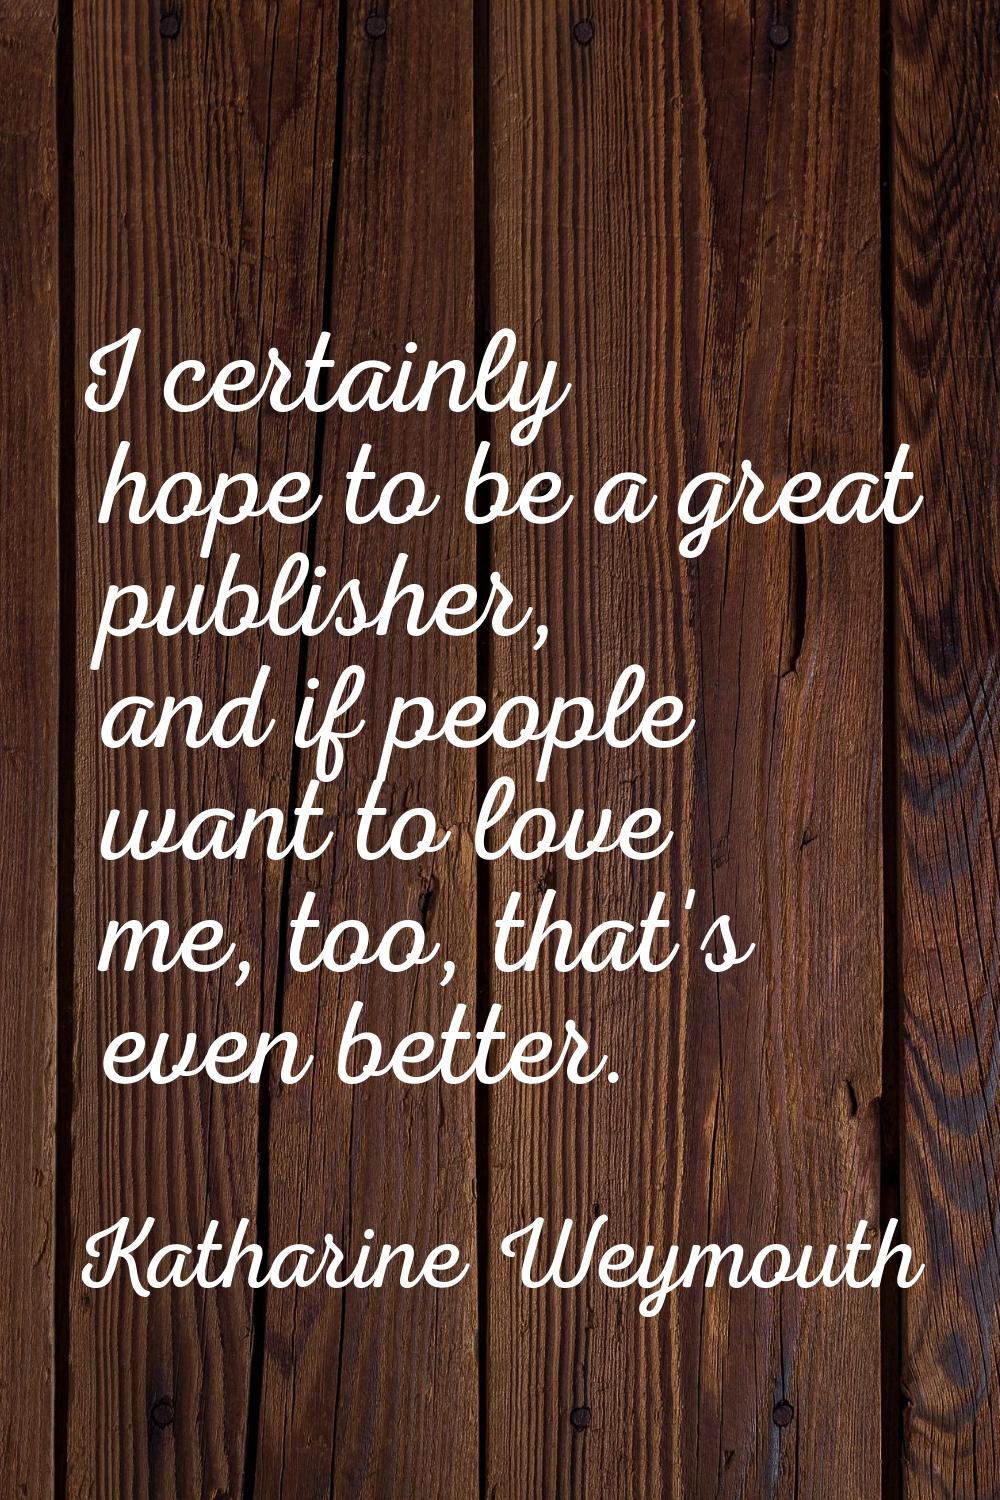 I certainly hope to be a great publisher, and if people want to love me, too, that's even better.